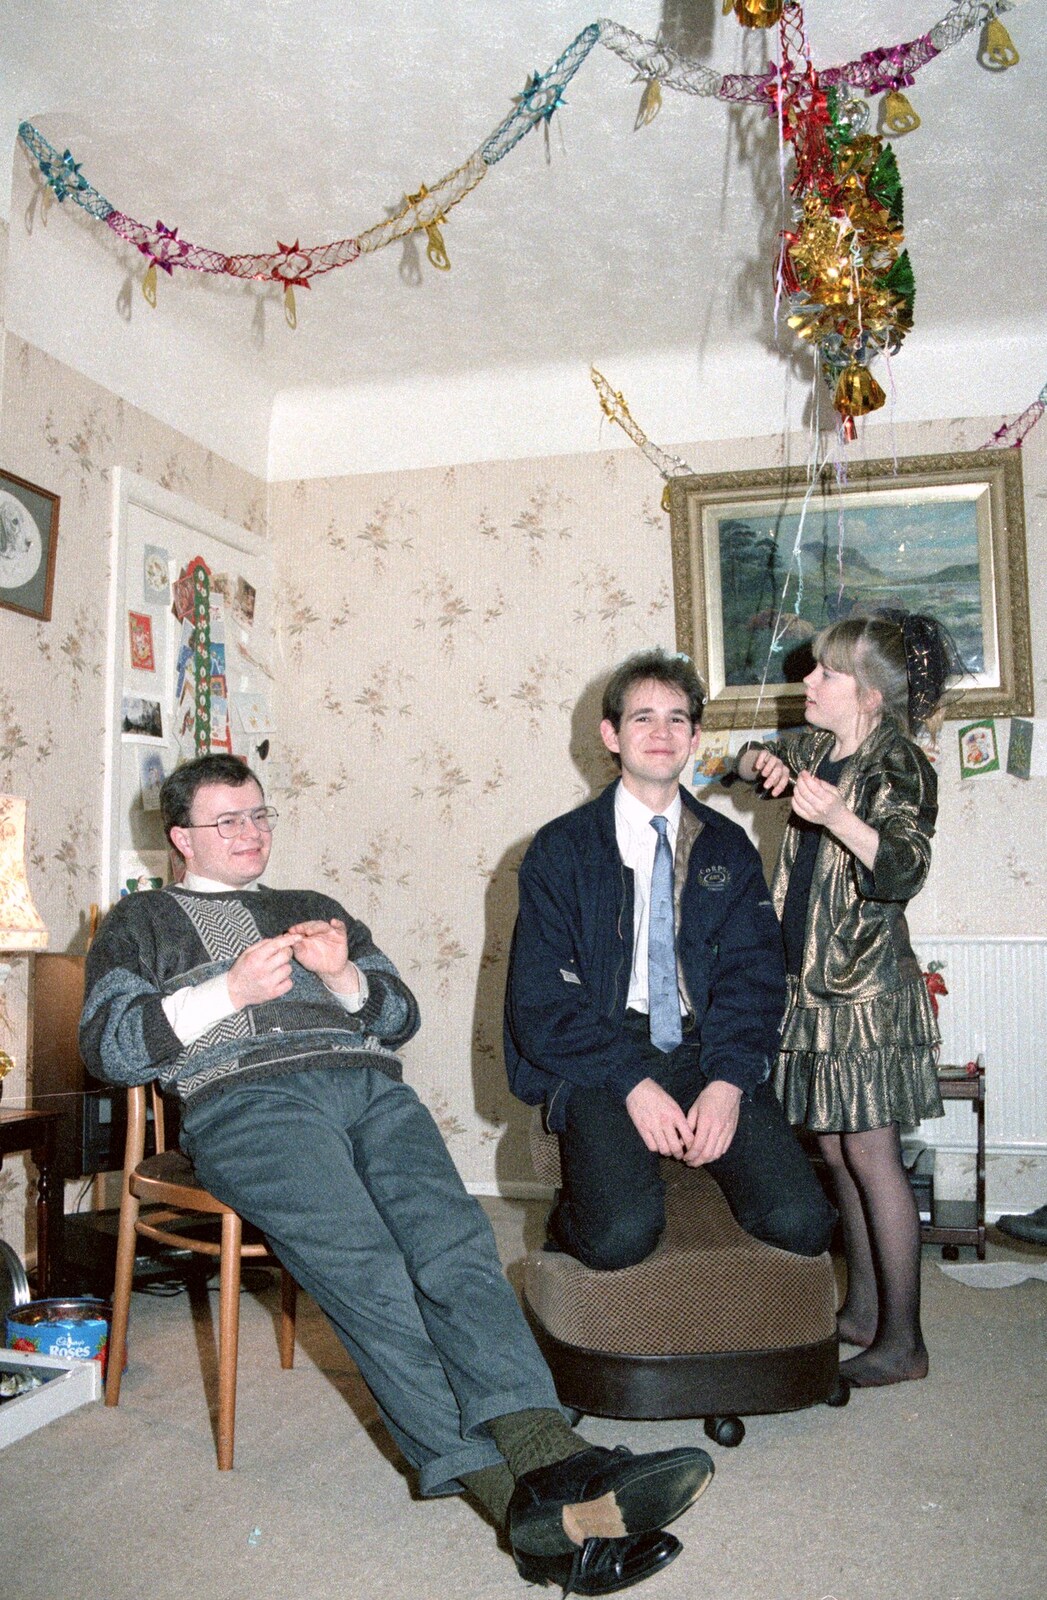 Hamish, Phil and Jenny - Hamish's sister from New Year's Eve at Hamish's, New Milton, Hampshire - 31st December 1988